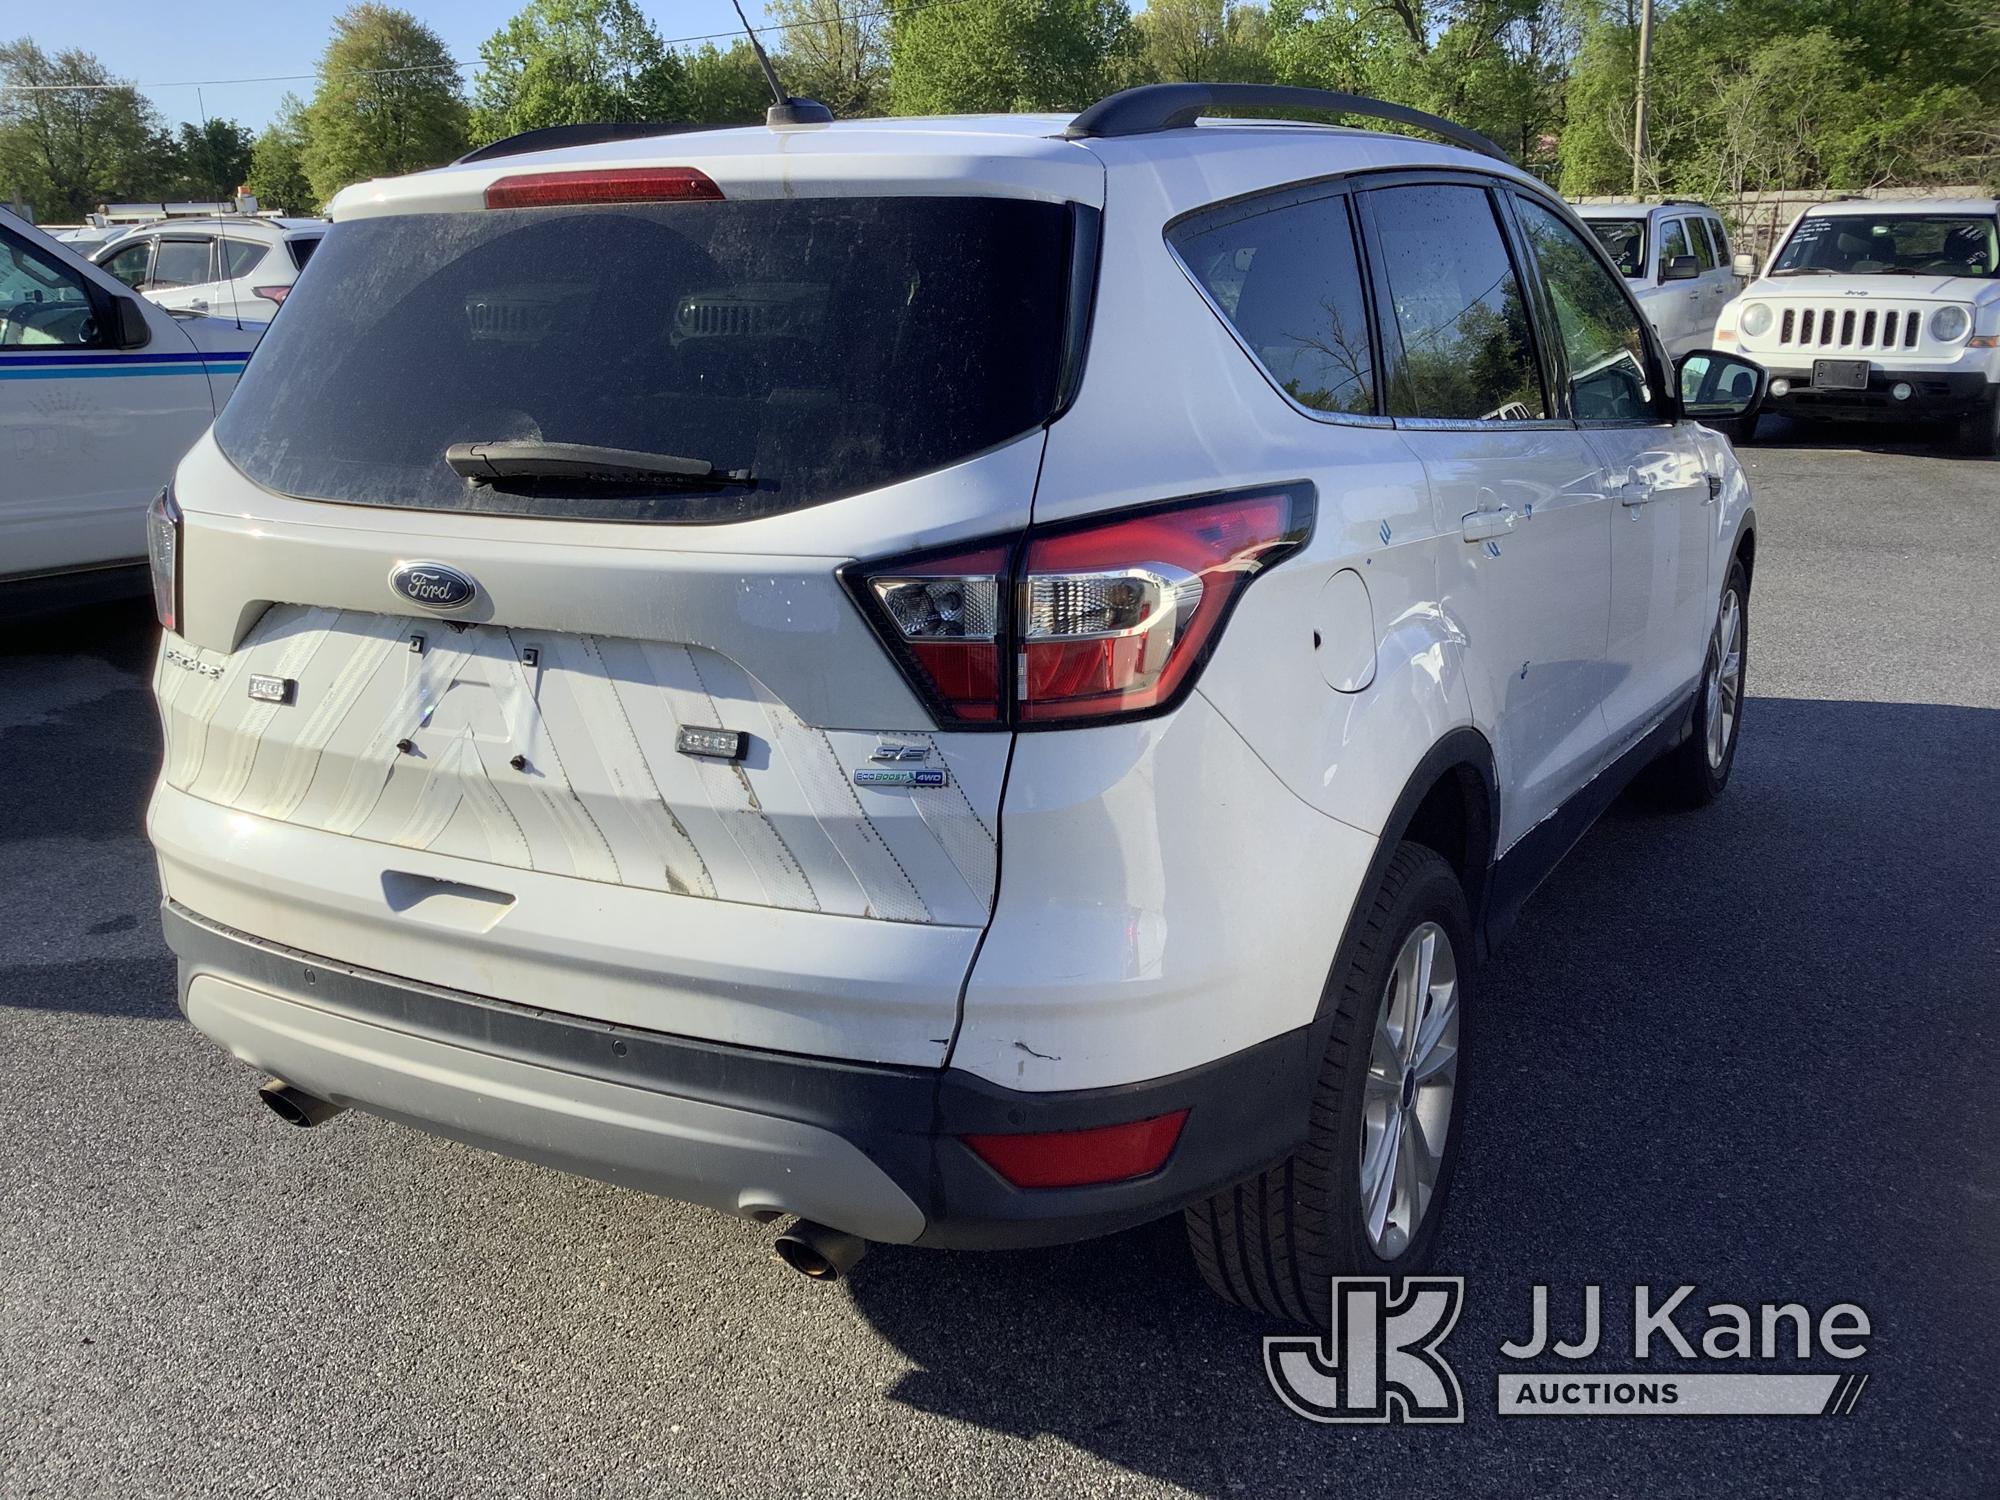 (Chester Springs, PA) 2017 Ford Escape 4x4 4-Door Sport Utility Vehicle Not Running, Condition Unkno